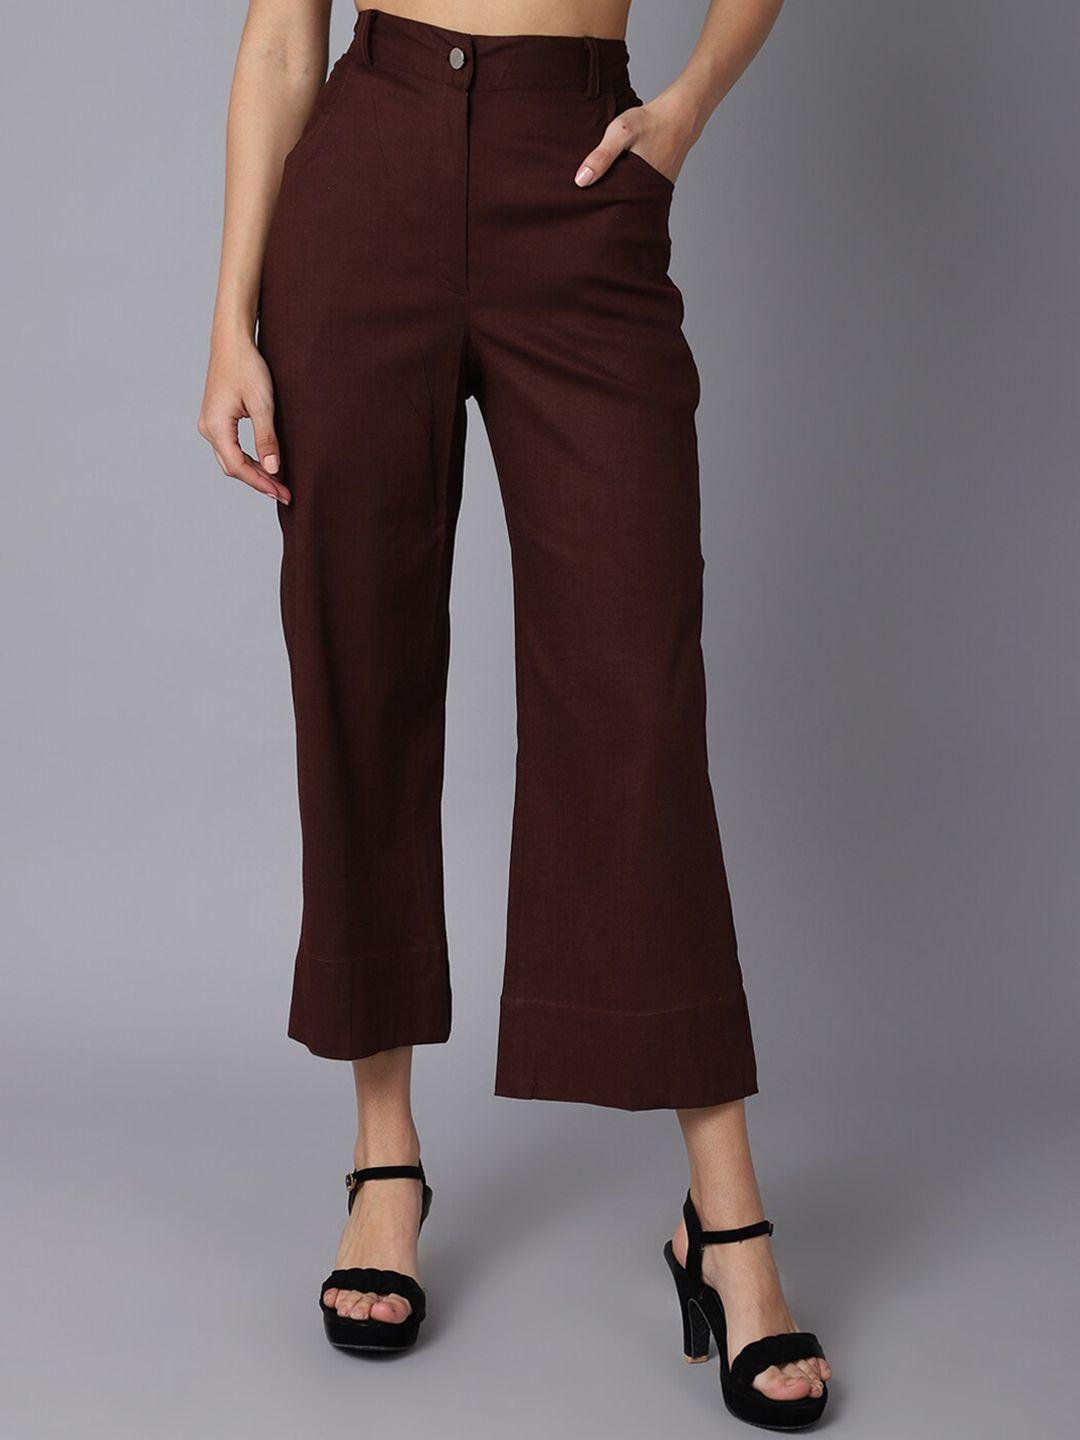 TAG 7 Women Brown Smart Flared Culottes Trousers